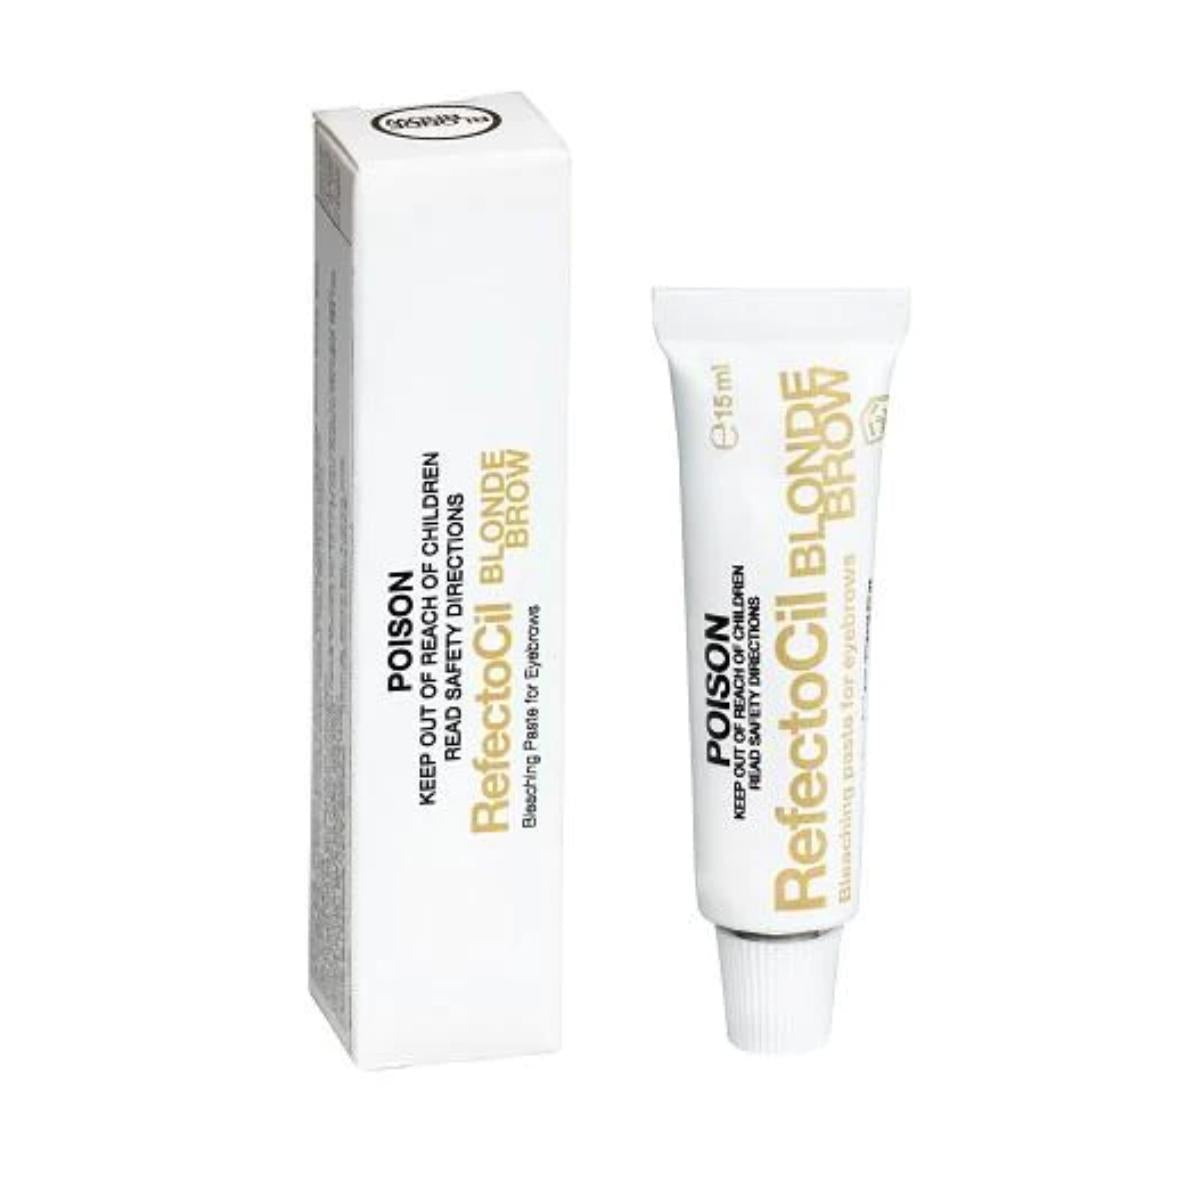 RefectoCil Blonde Brow Tint